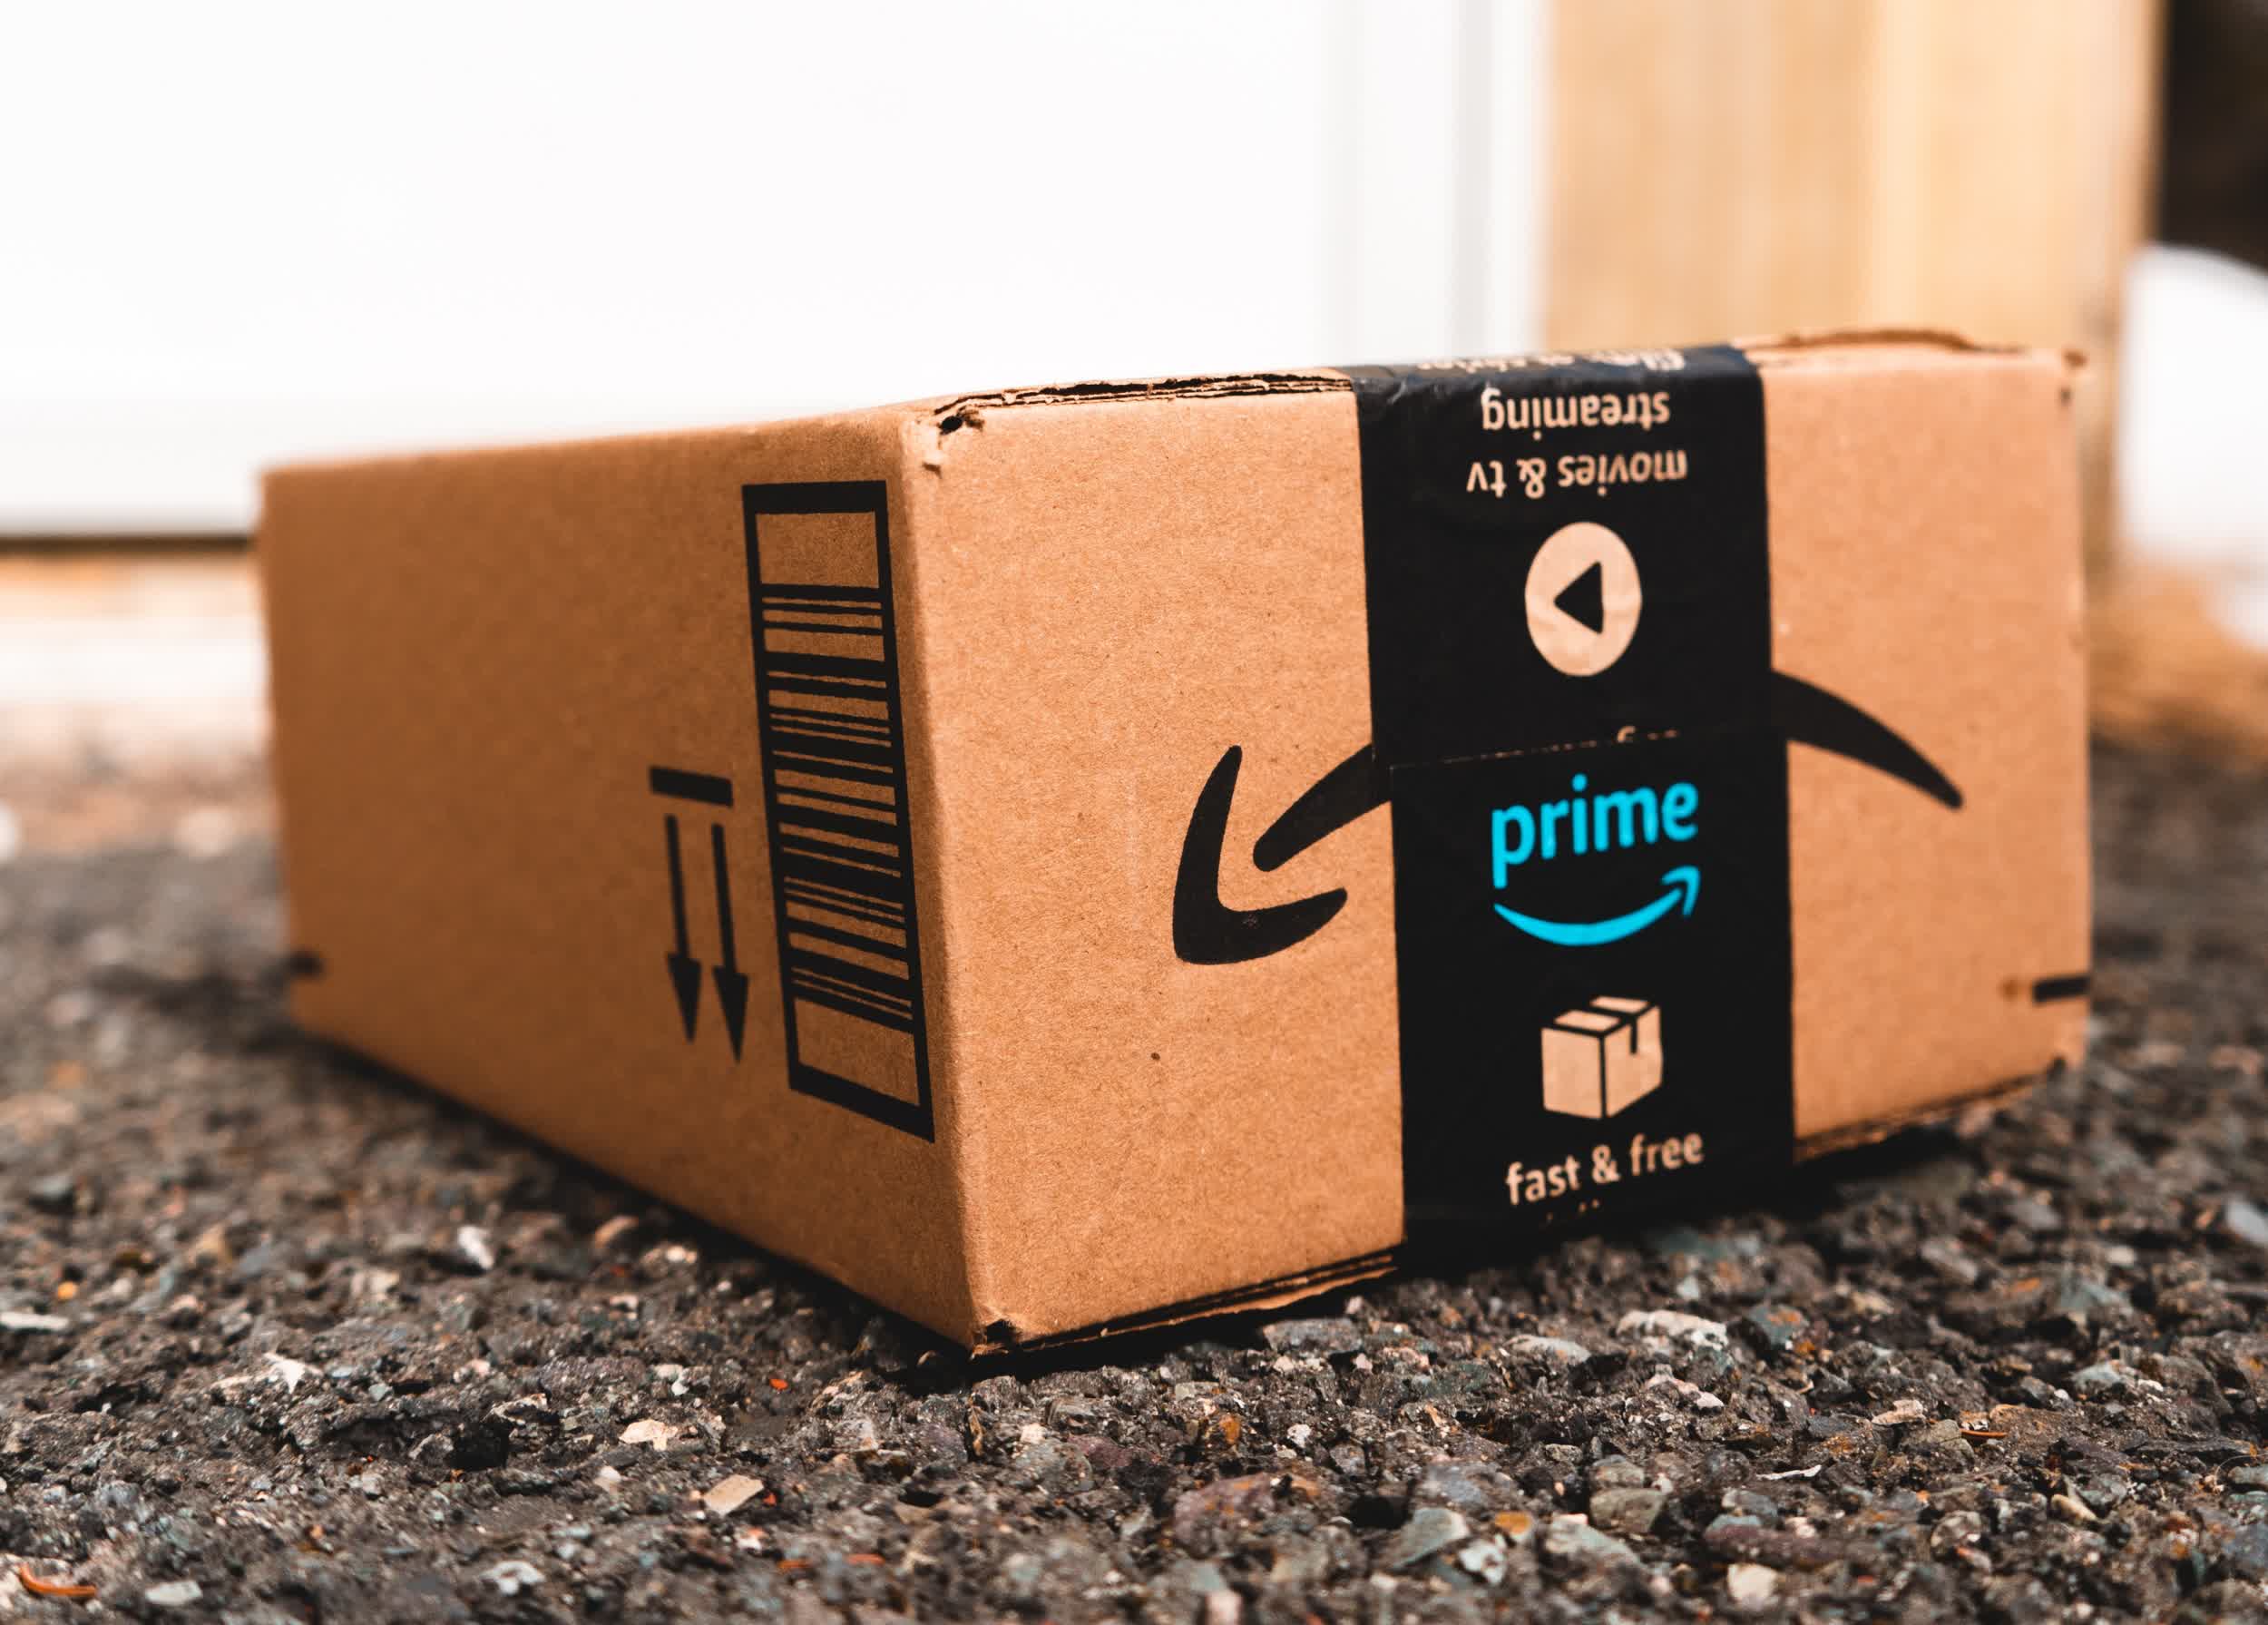 Amazon Prime Day is set to return on July 11